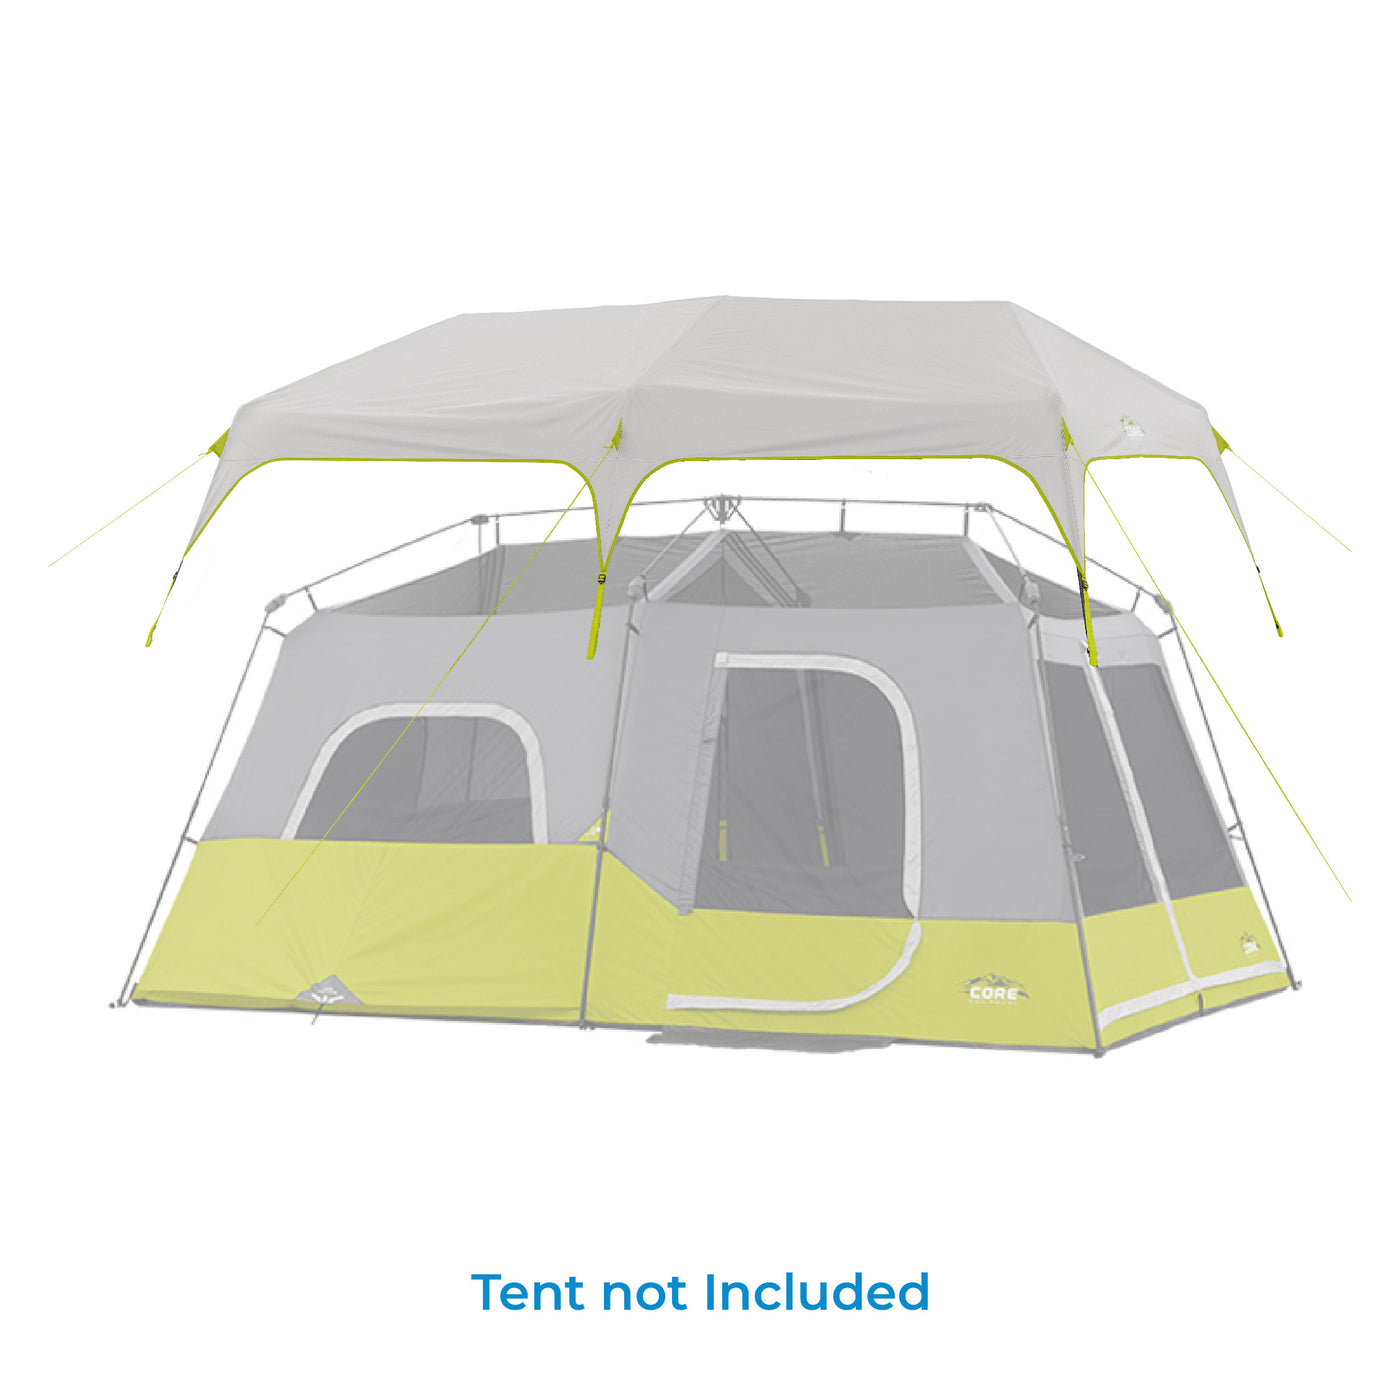 CORE 9 Person Instant Cabin Tent with Full Rainfly 14' x 9' –